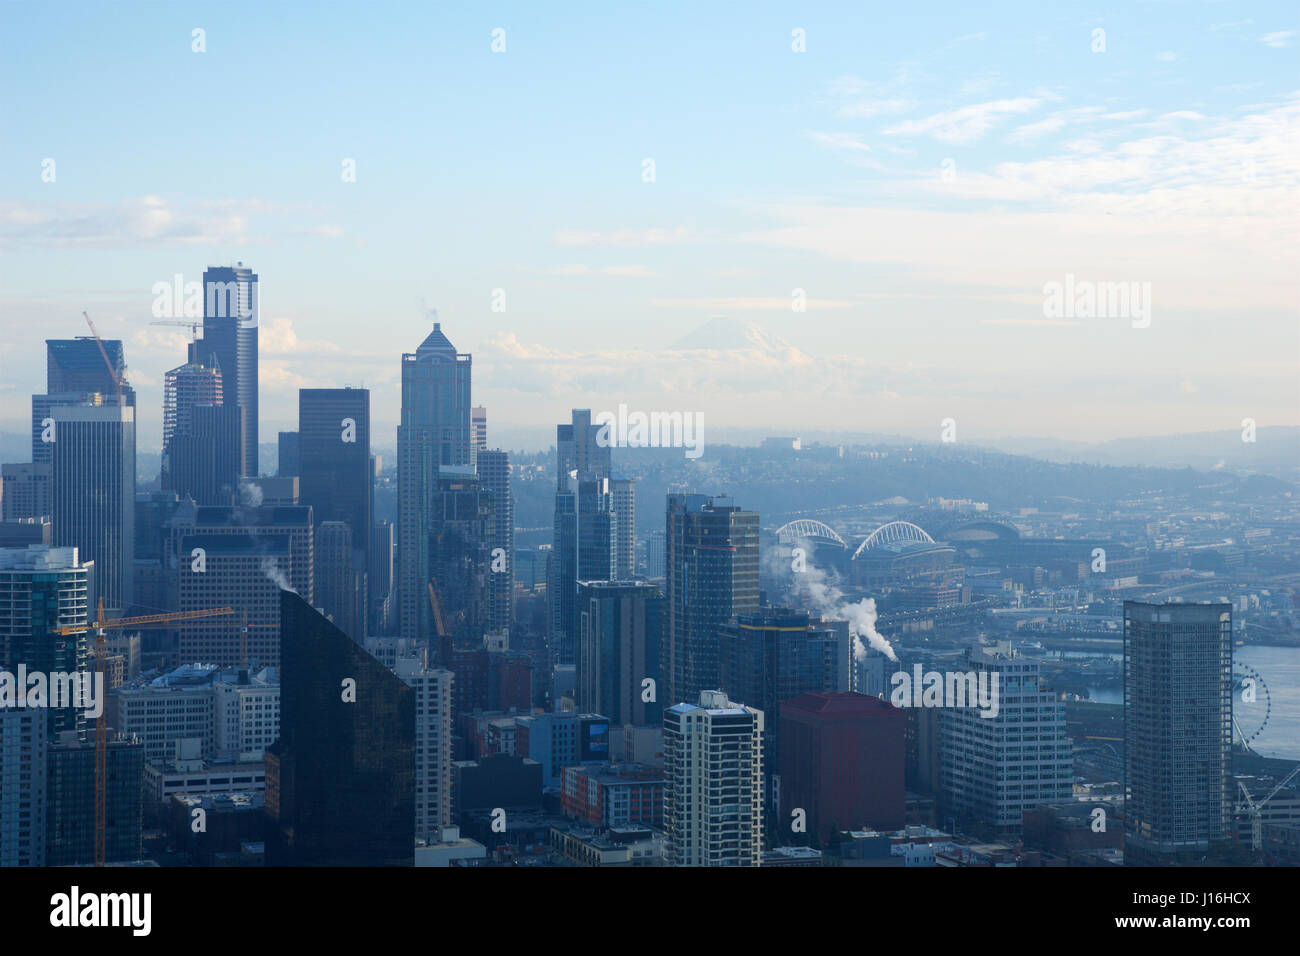 SEATTLE, WASHINGTON, USA - JAN 23rd, 2017: skyline of downtown Seattle, view from the top of the Space Needle during a cloudy day Stock Photo